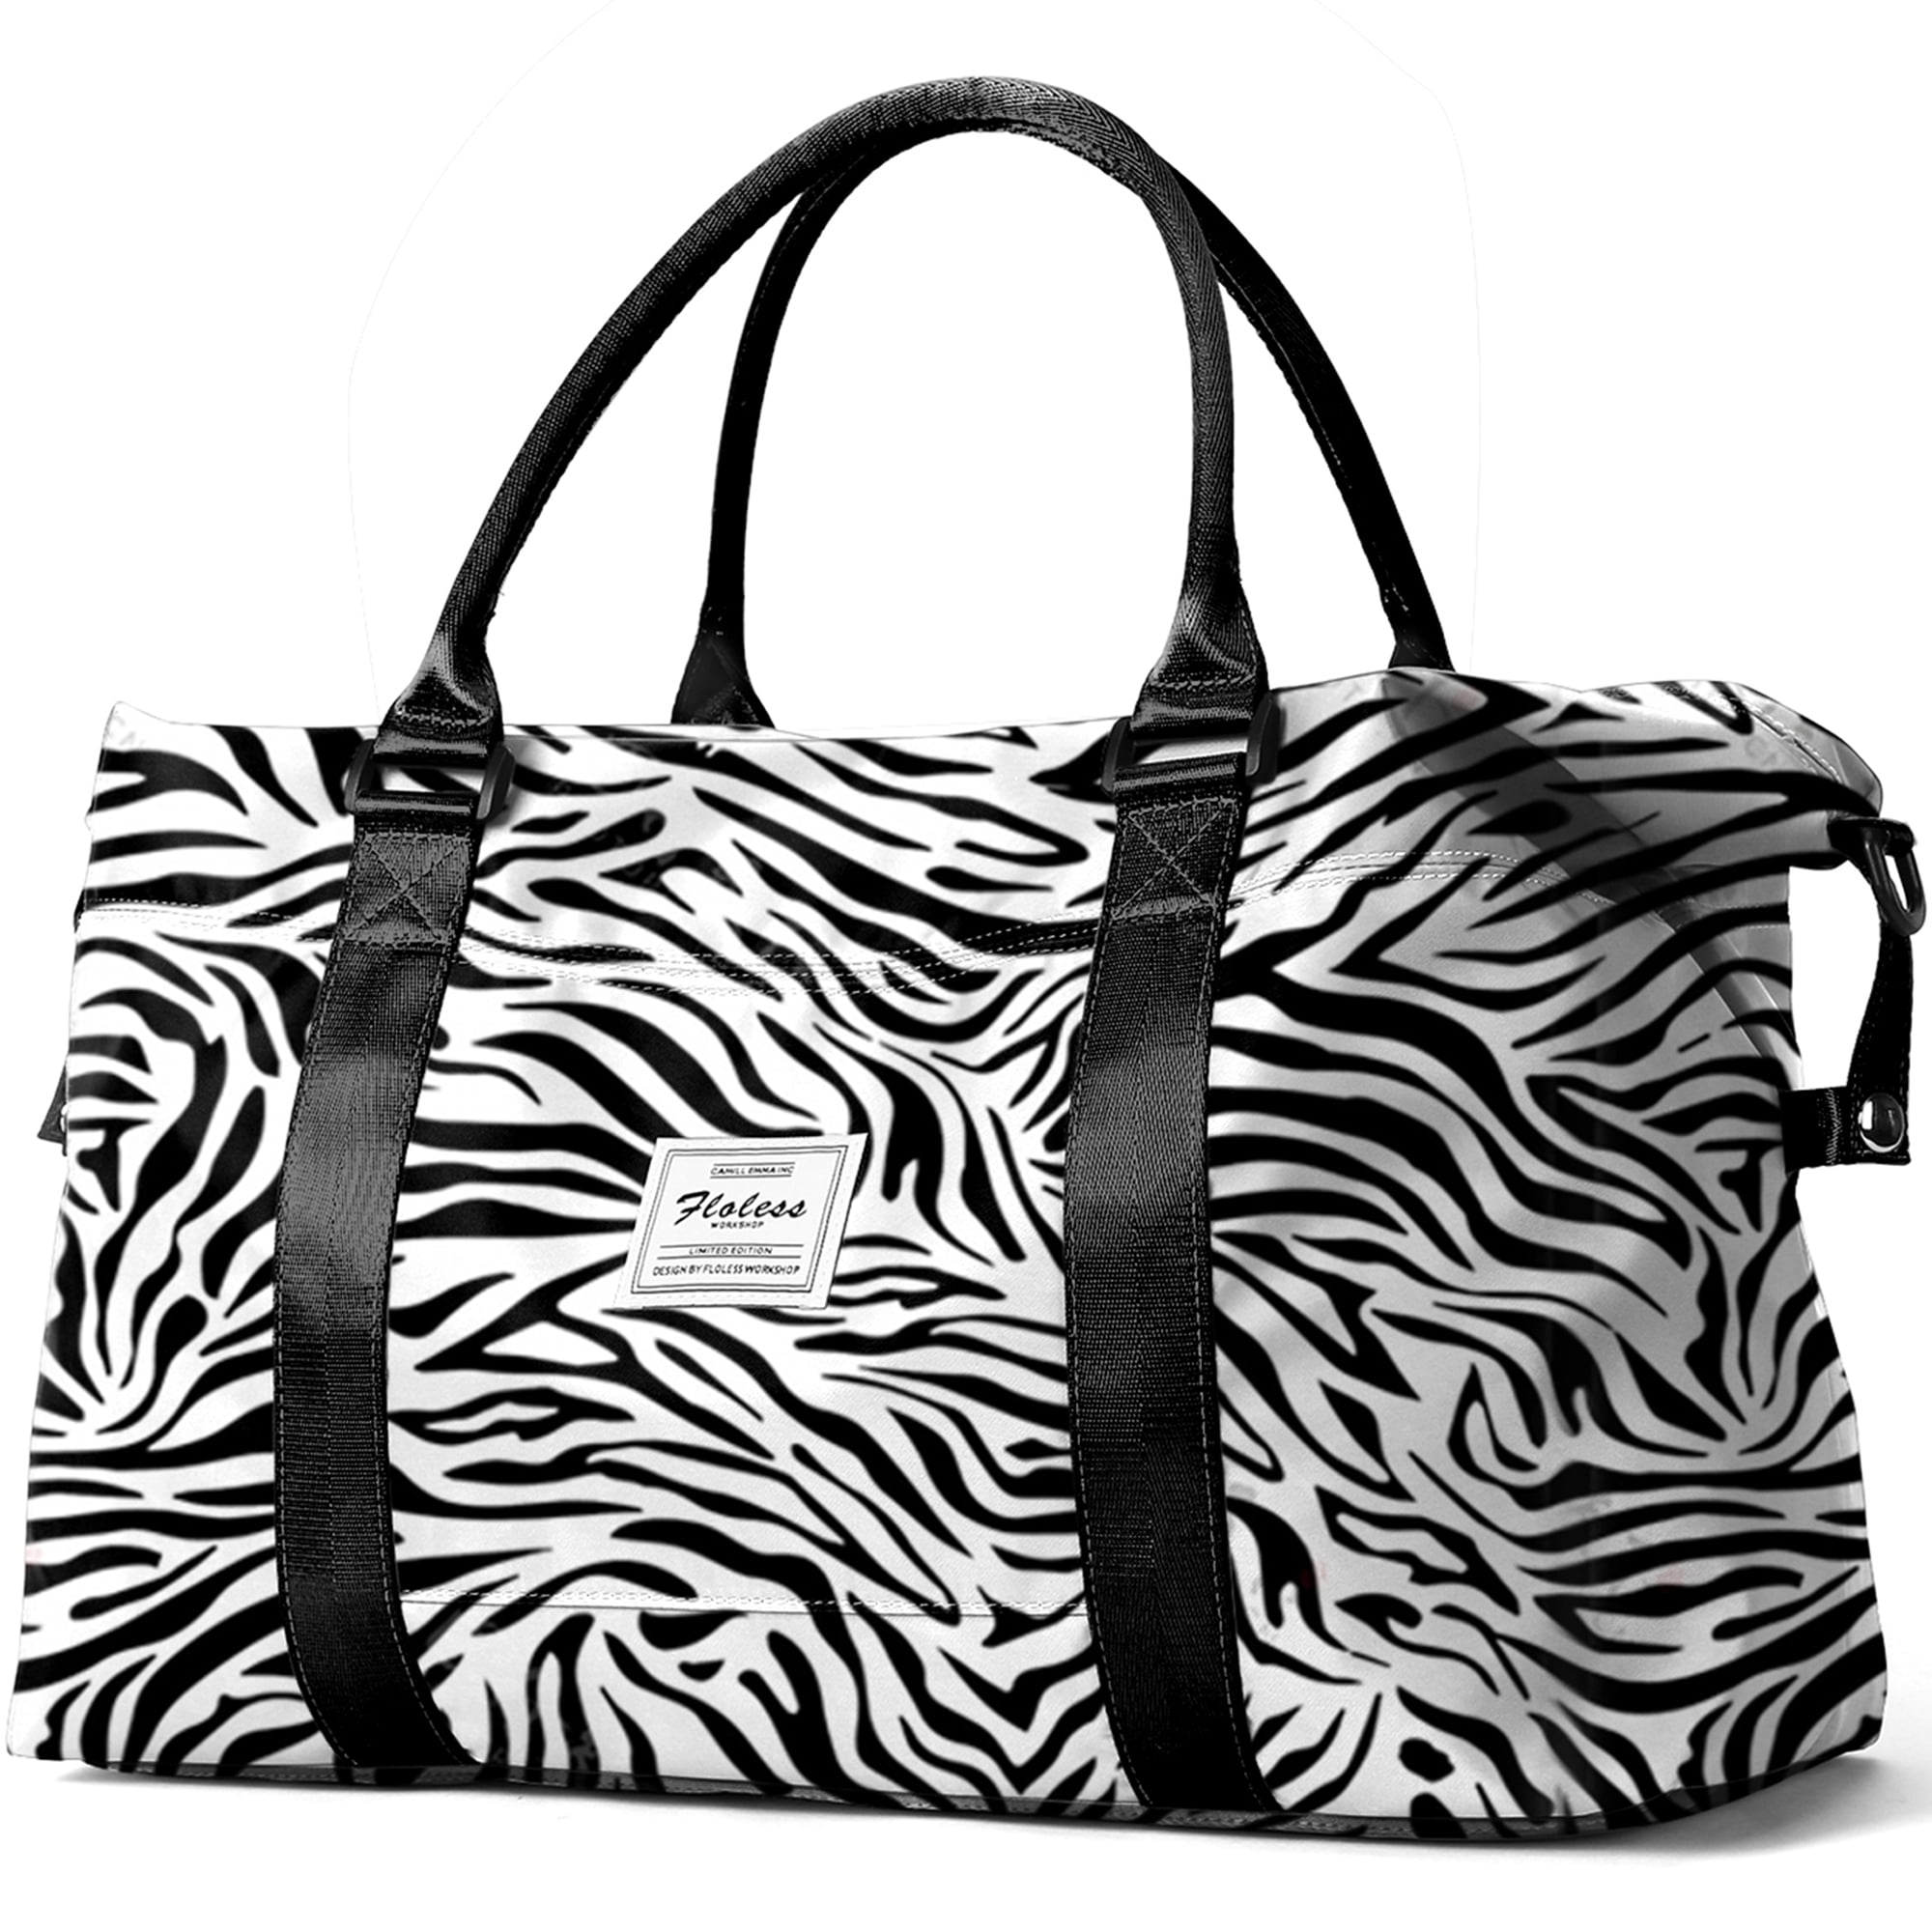  Womens Sports Gym Bag, Workout Duffel Bag, Travel Tote Duffle  Bags, Weekender Carry On for Women, Overnight Crossbody Bag Fit 15.6 inch  Laptop (Black 2)